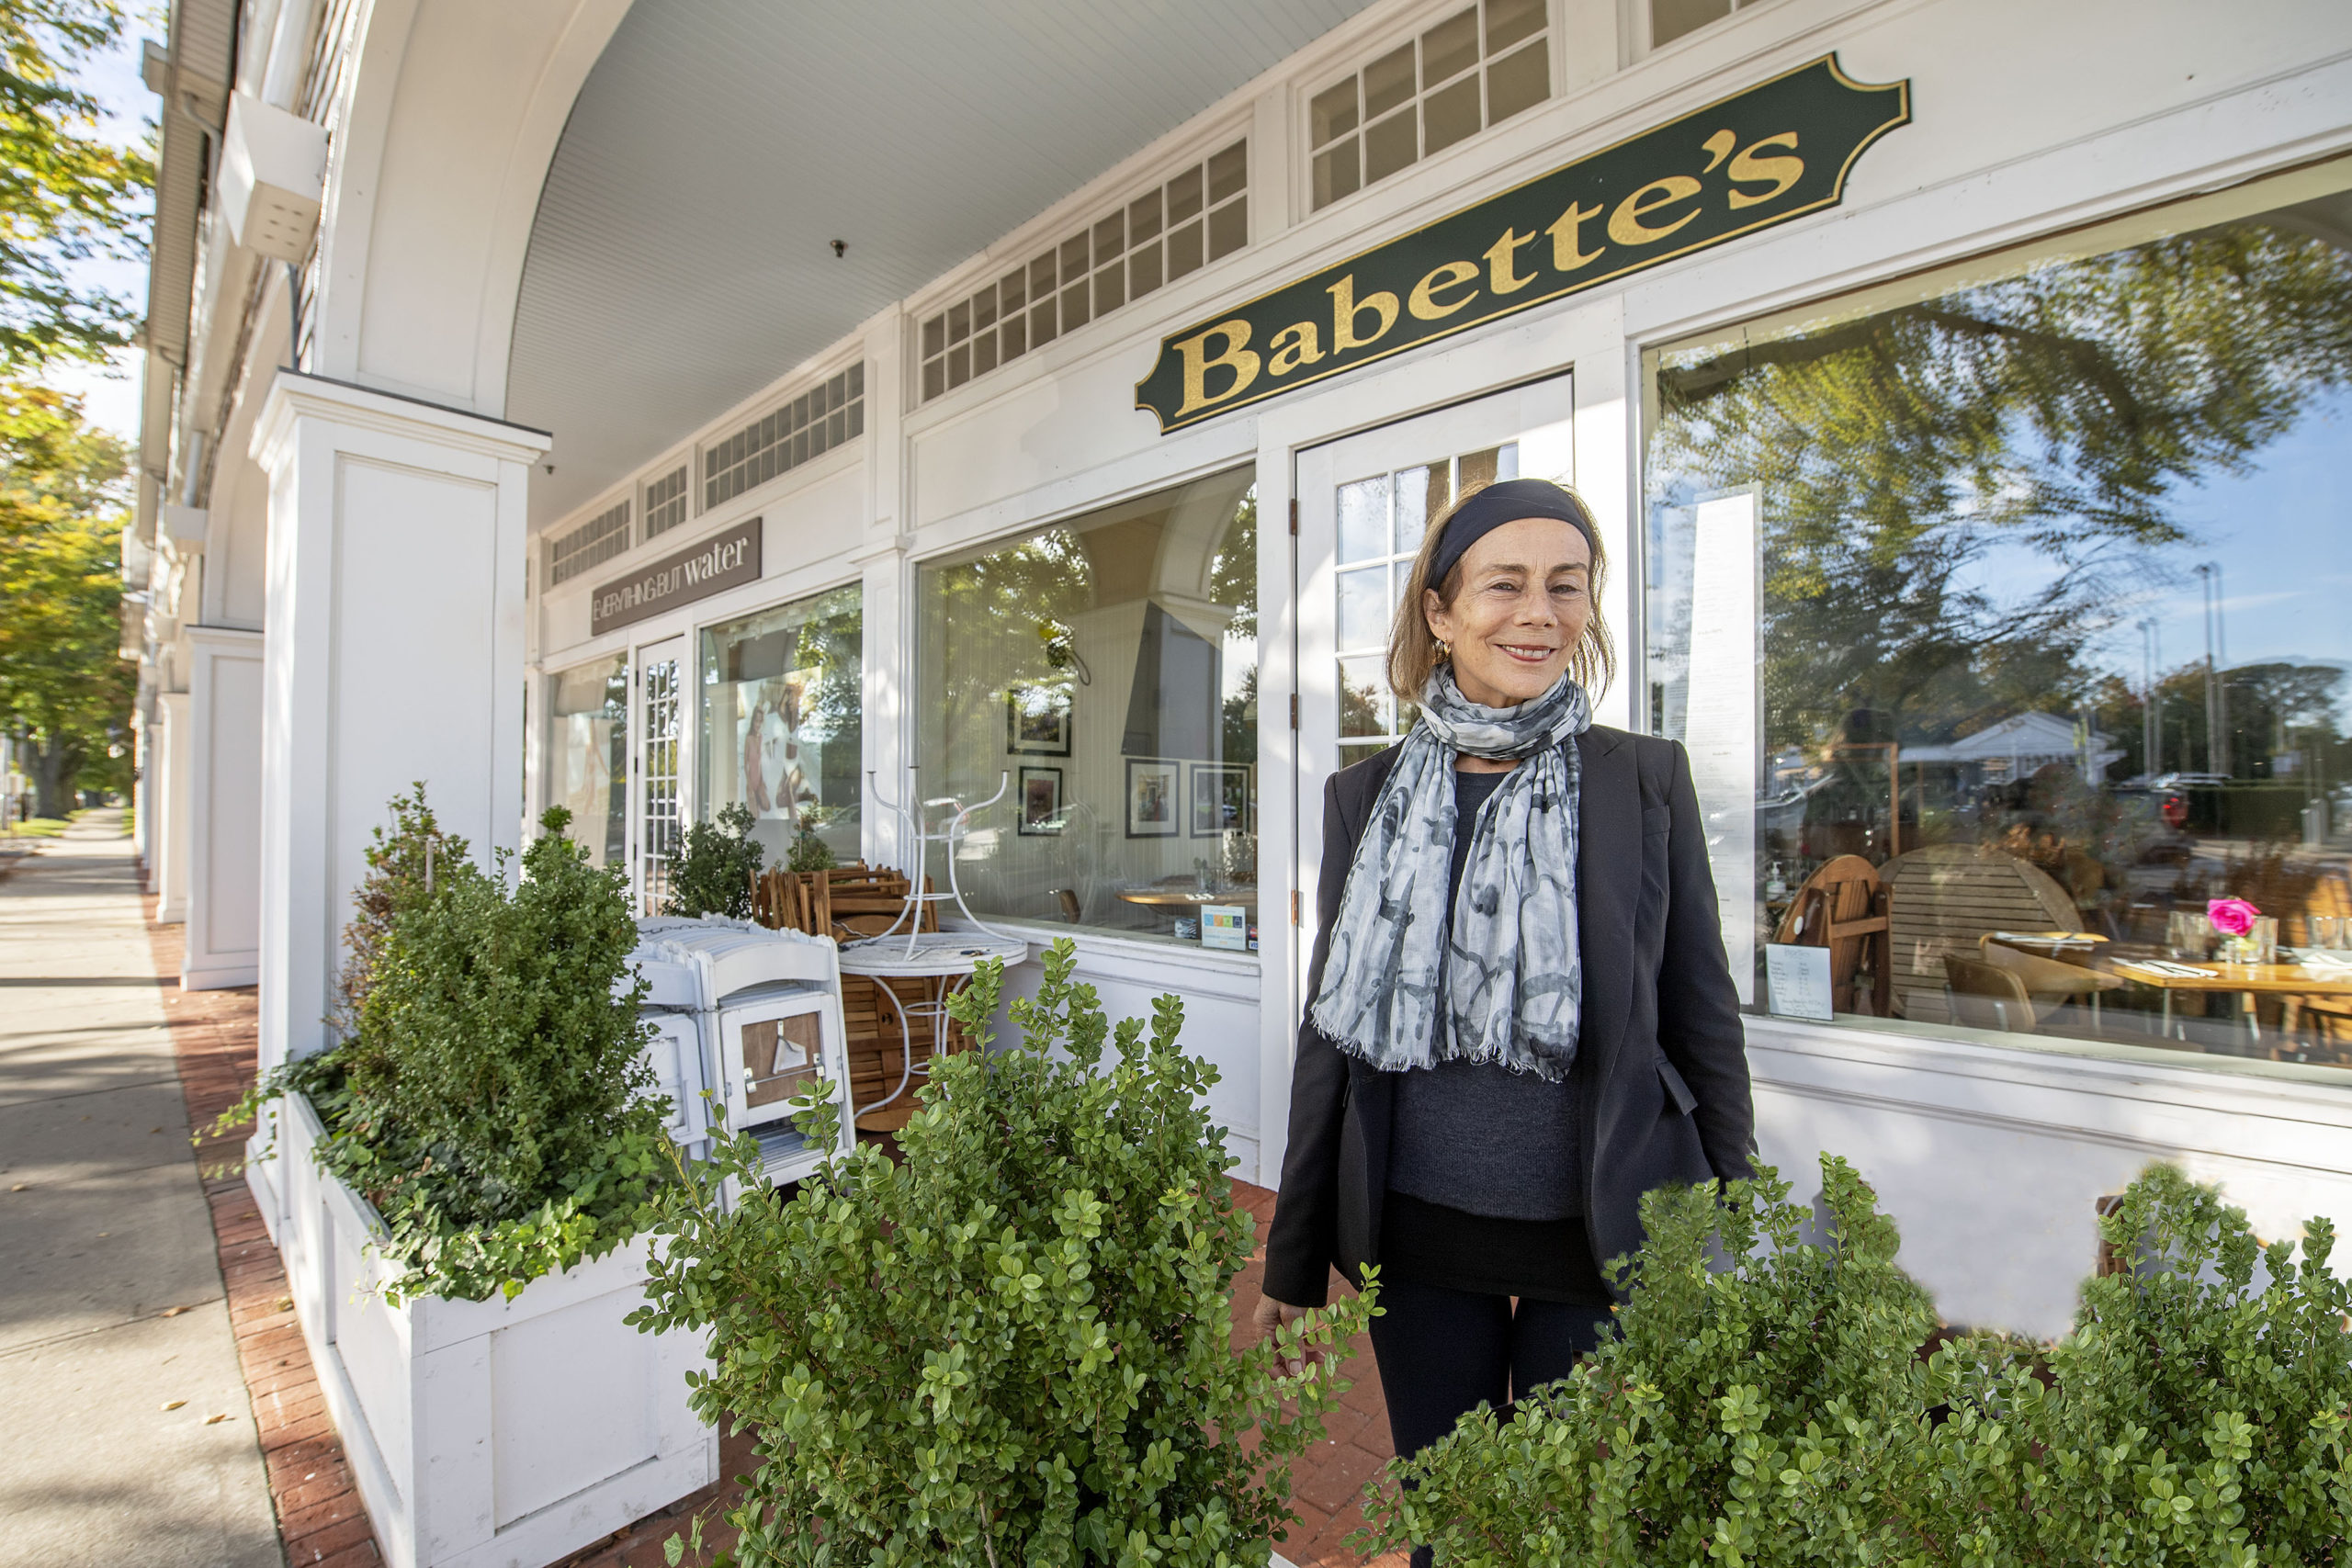 Babette's owner Barbara Layton outside the Newtown Lane restaurant which has focused for the last 27 years on vegetarian dishes, organic ingredients and making healthy food delicious, she says.